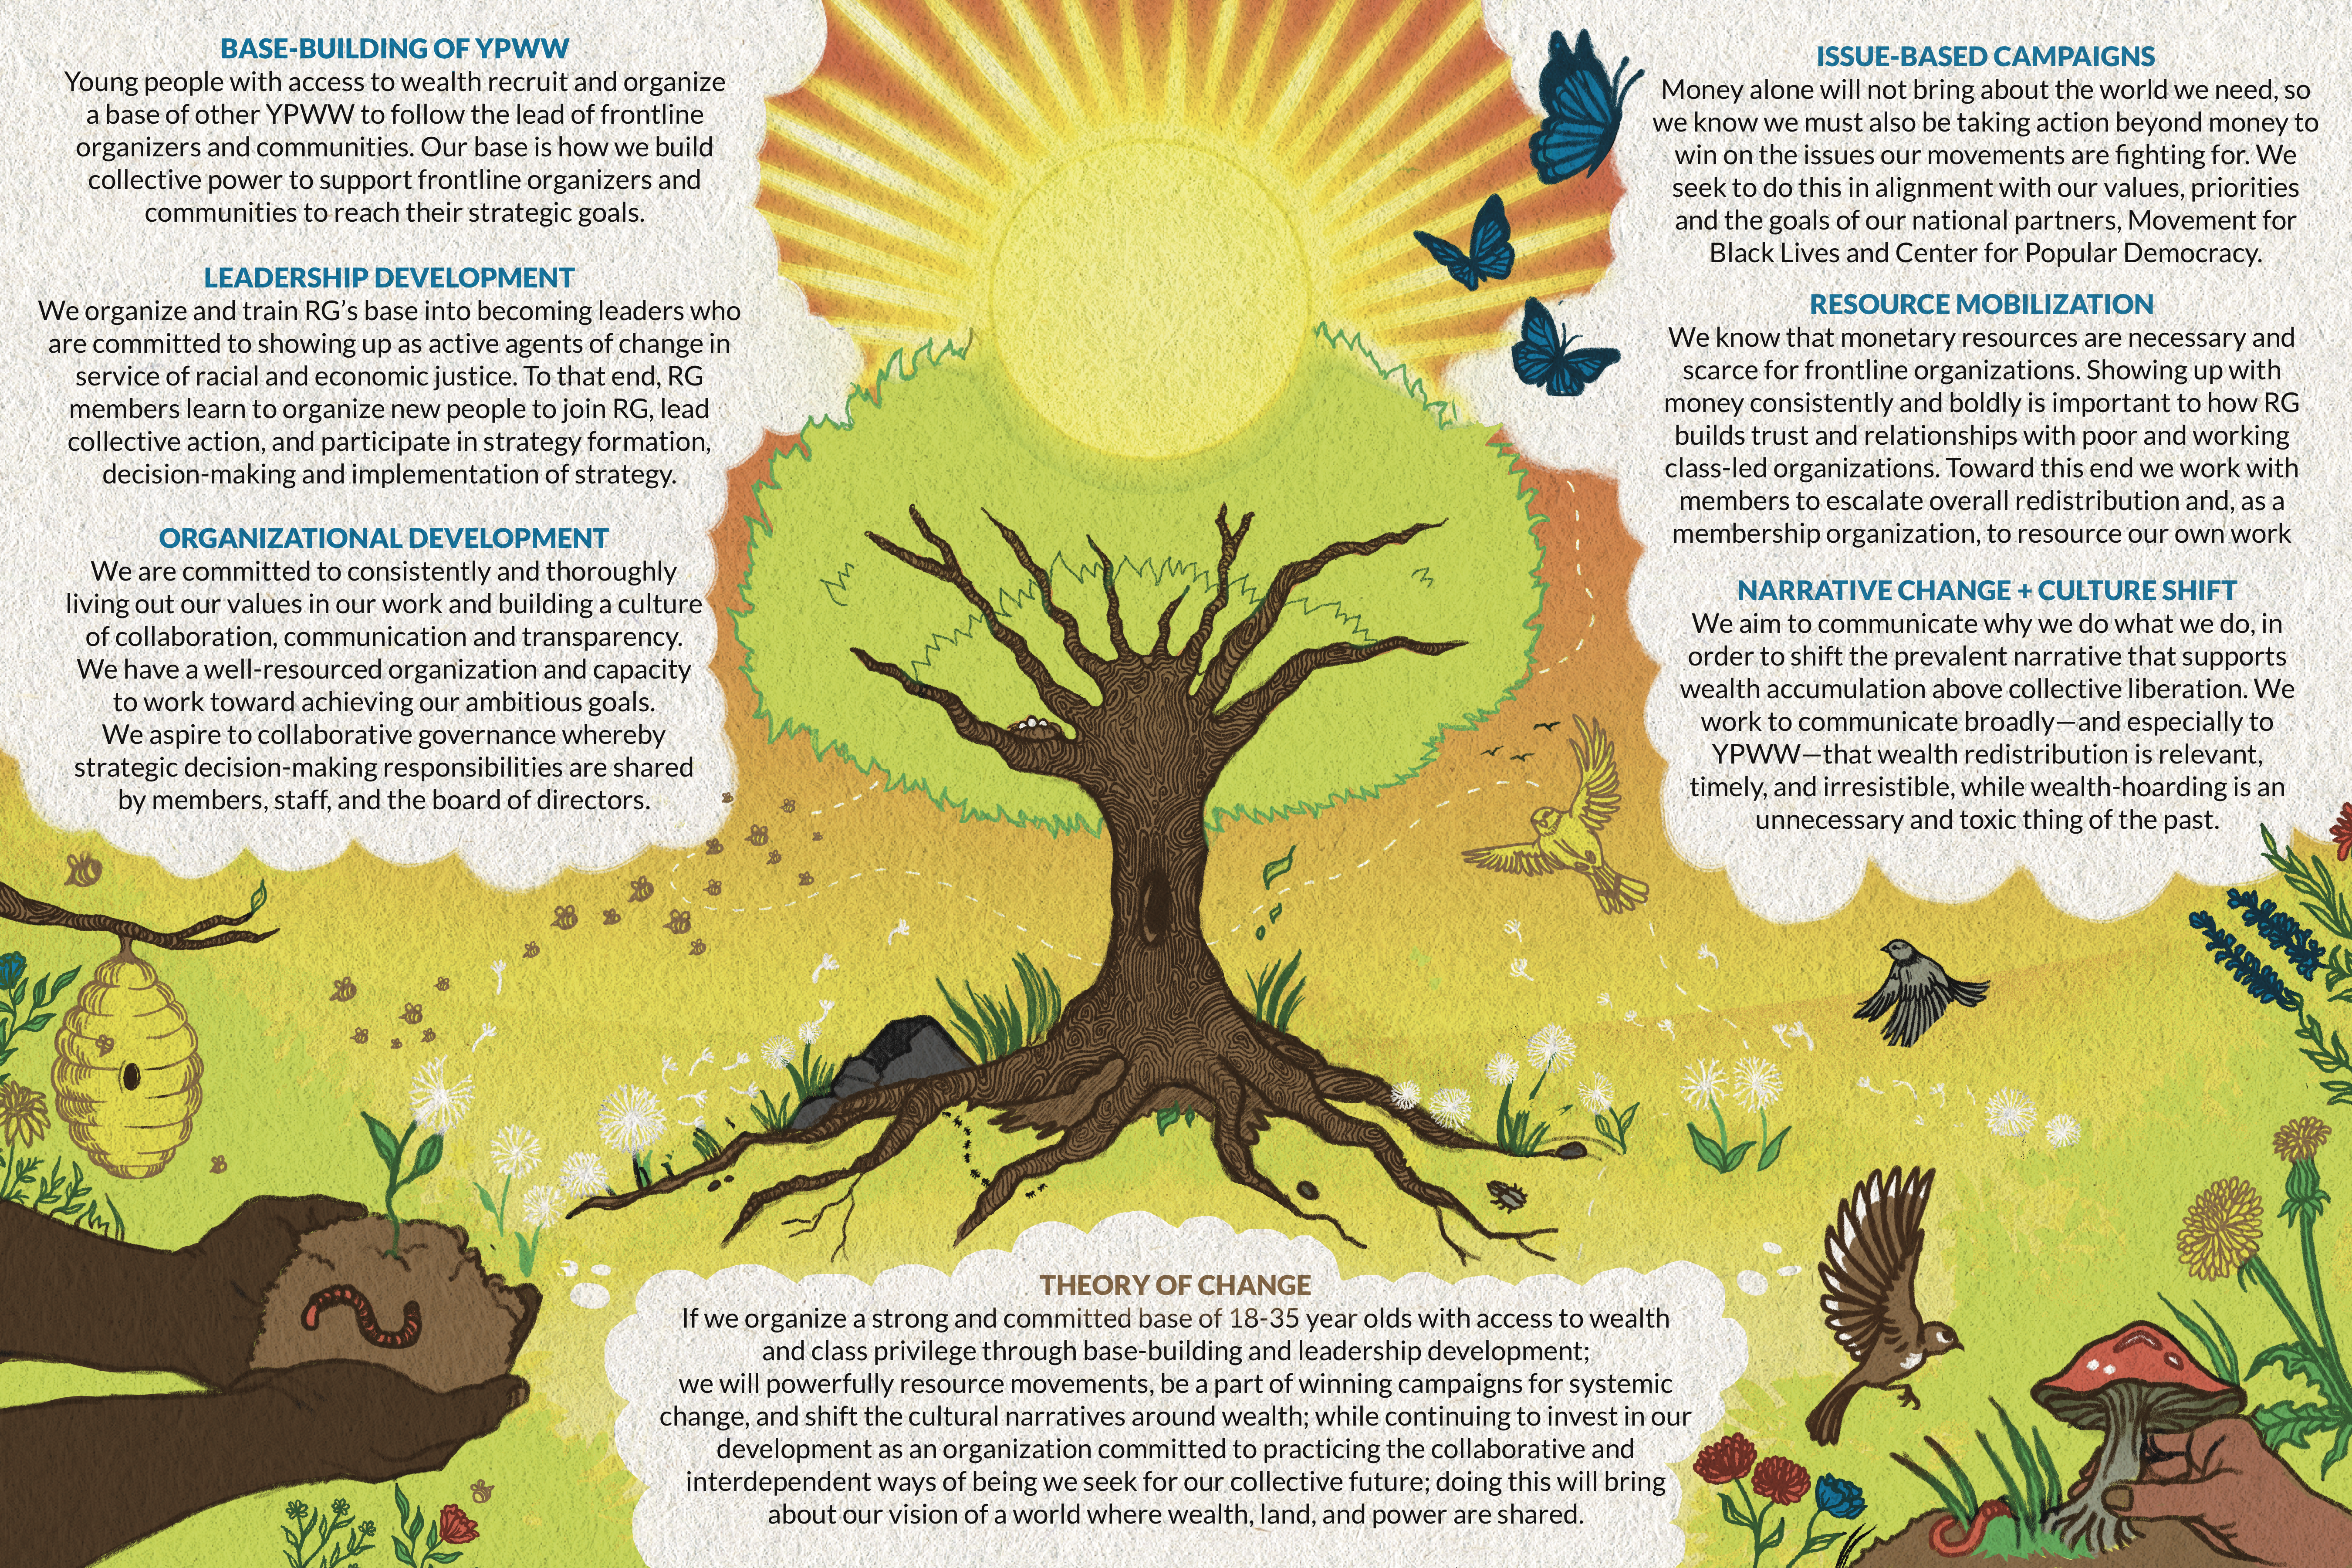 Large tree in the background with the sun rising behind it. In the clouds are RG's newest organizing model and theory of change in big text boxes. Around the size of the image are hands holding dirt and mushrooms. 